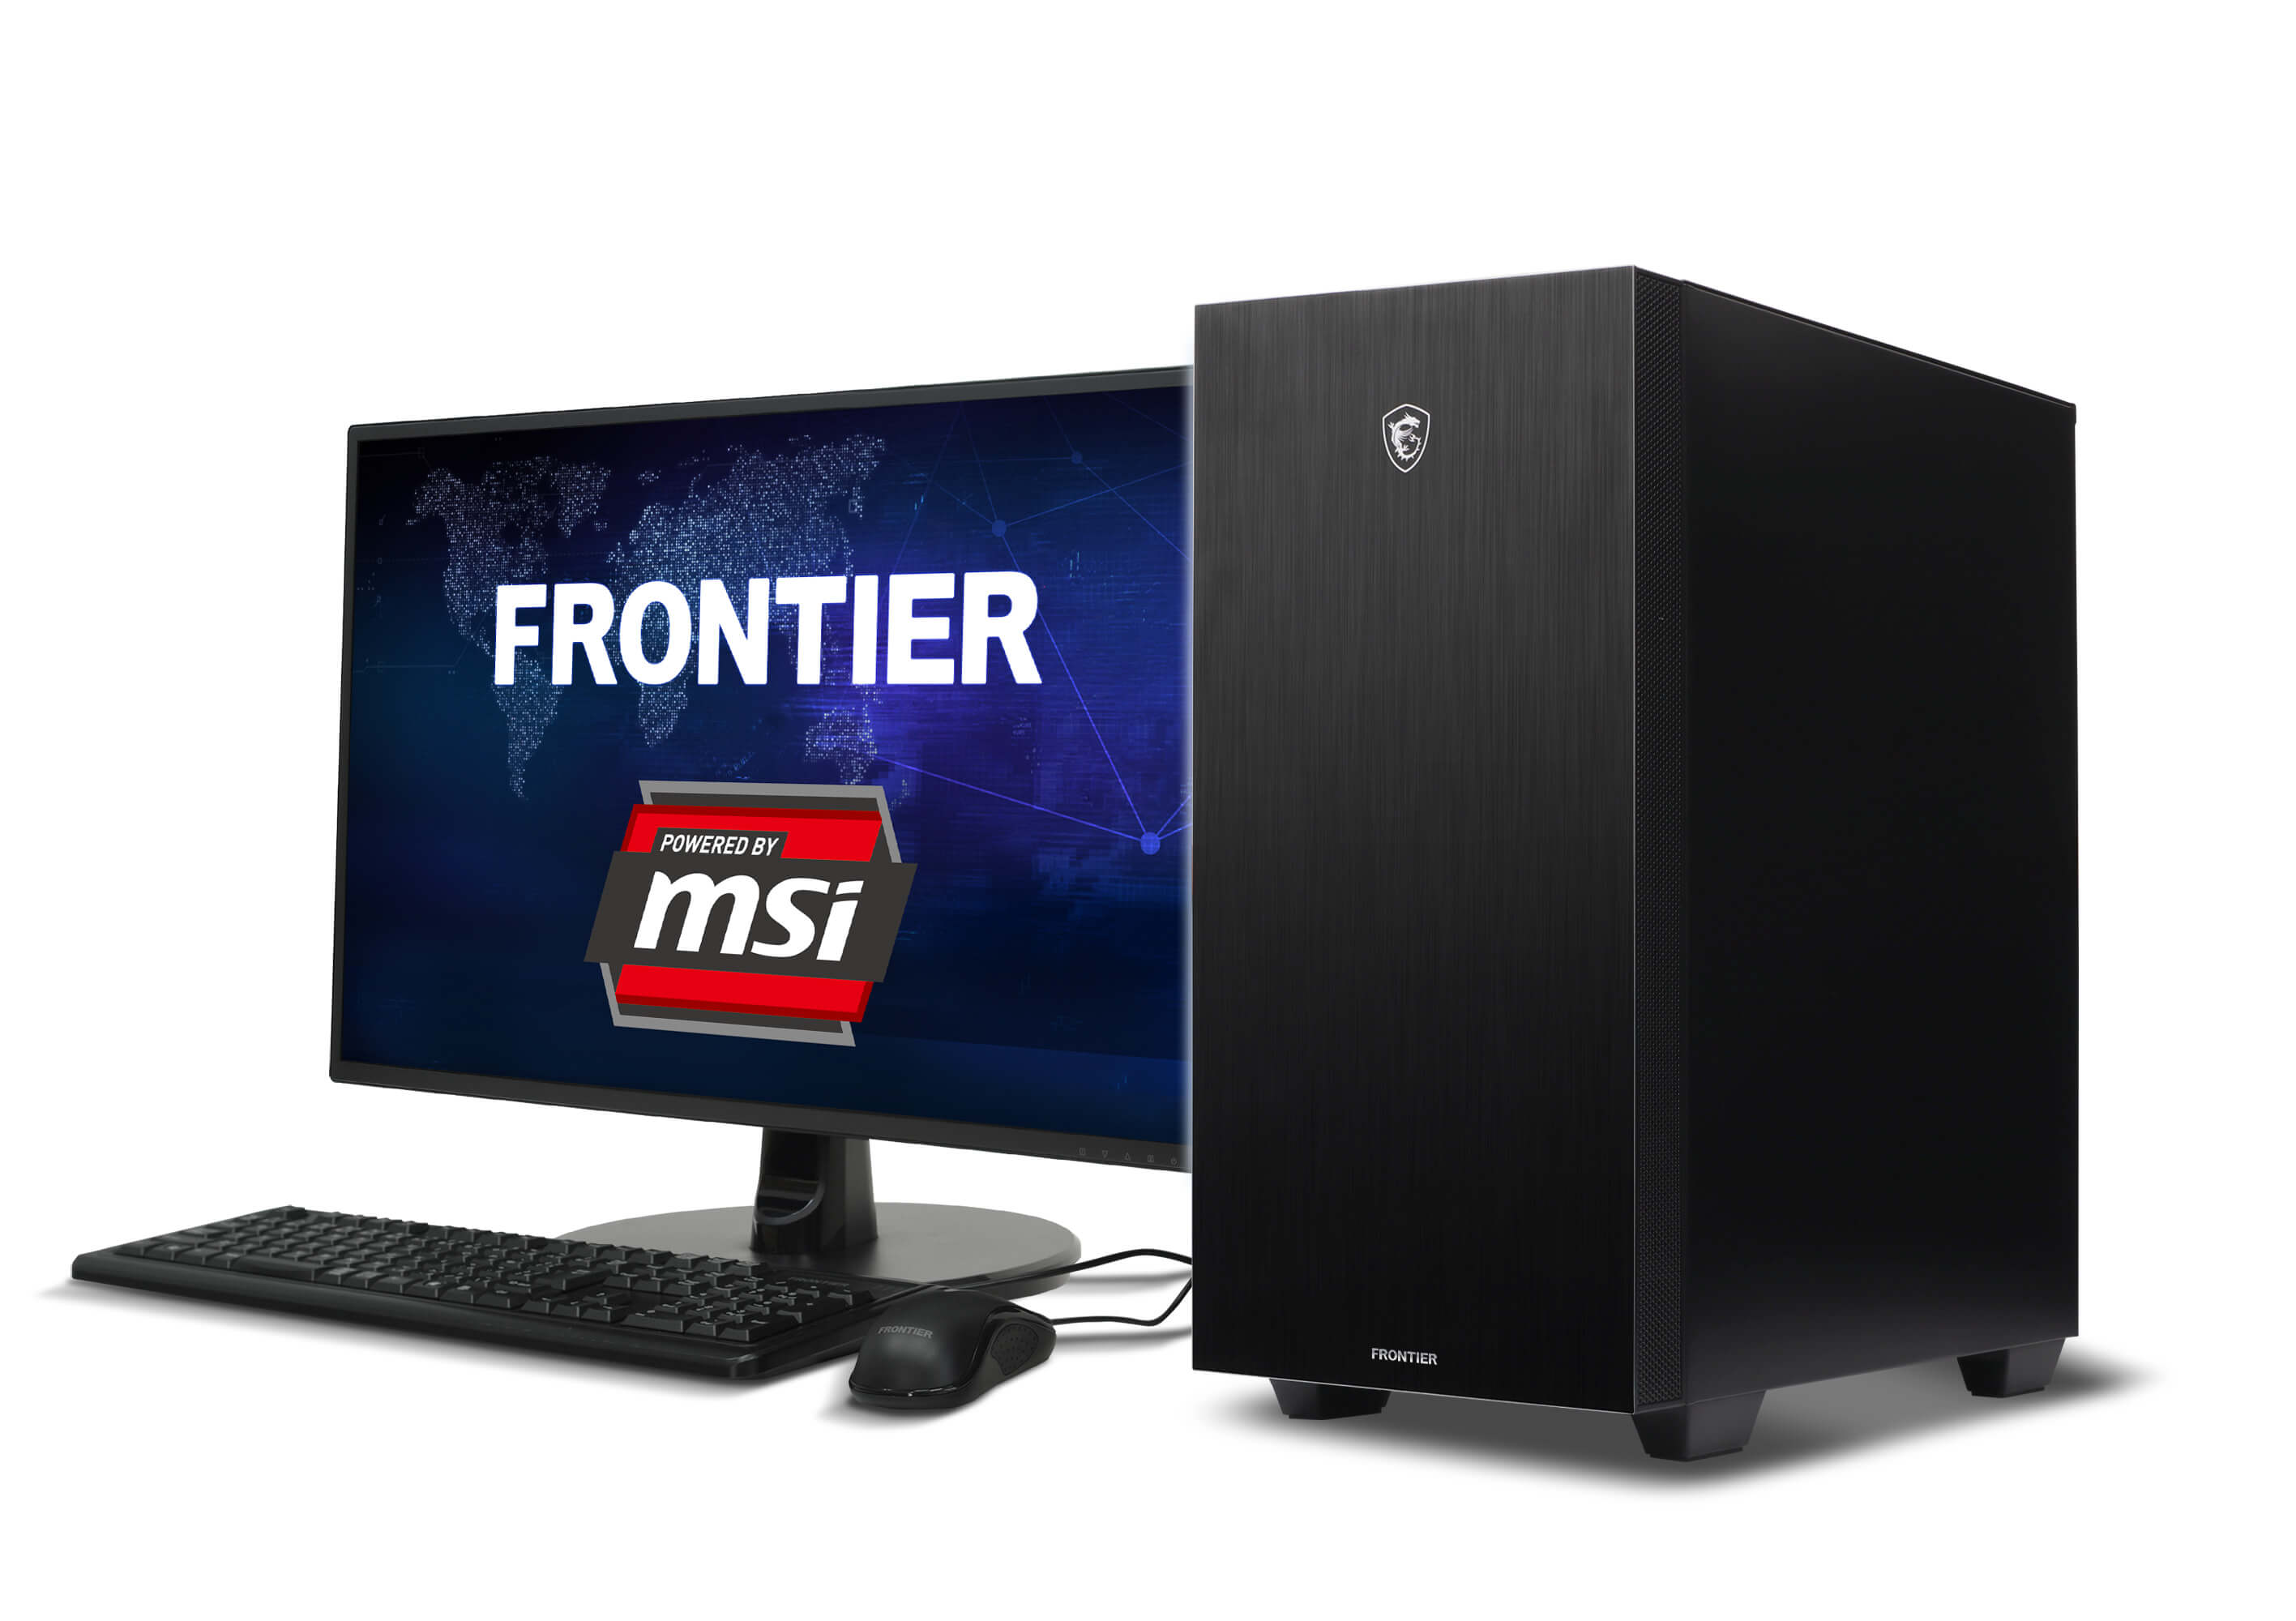 FRONTIER、MSIパーツ採用のデスクトップPC - PC Watch